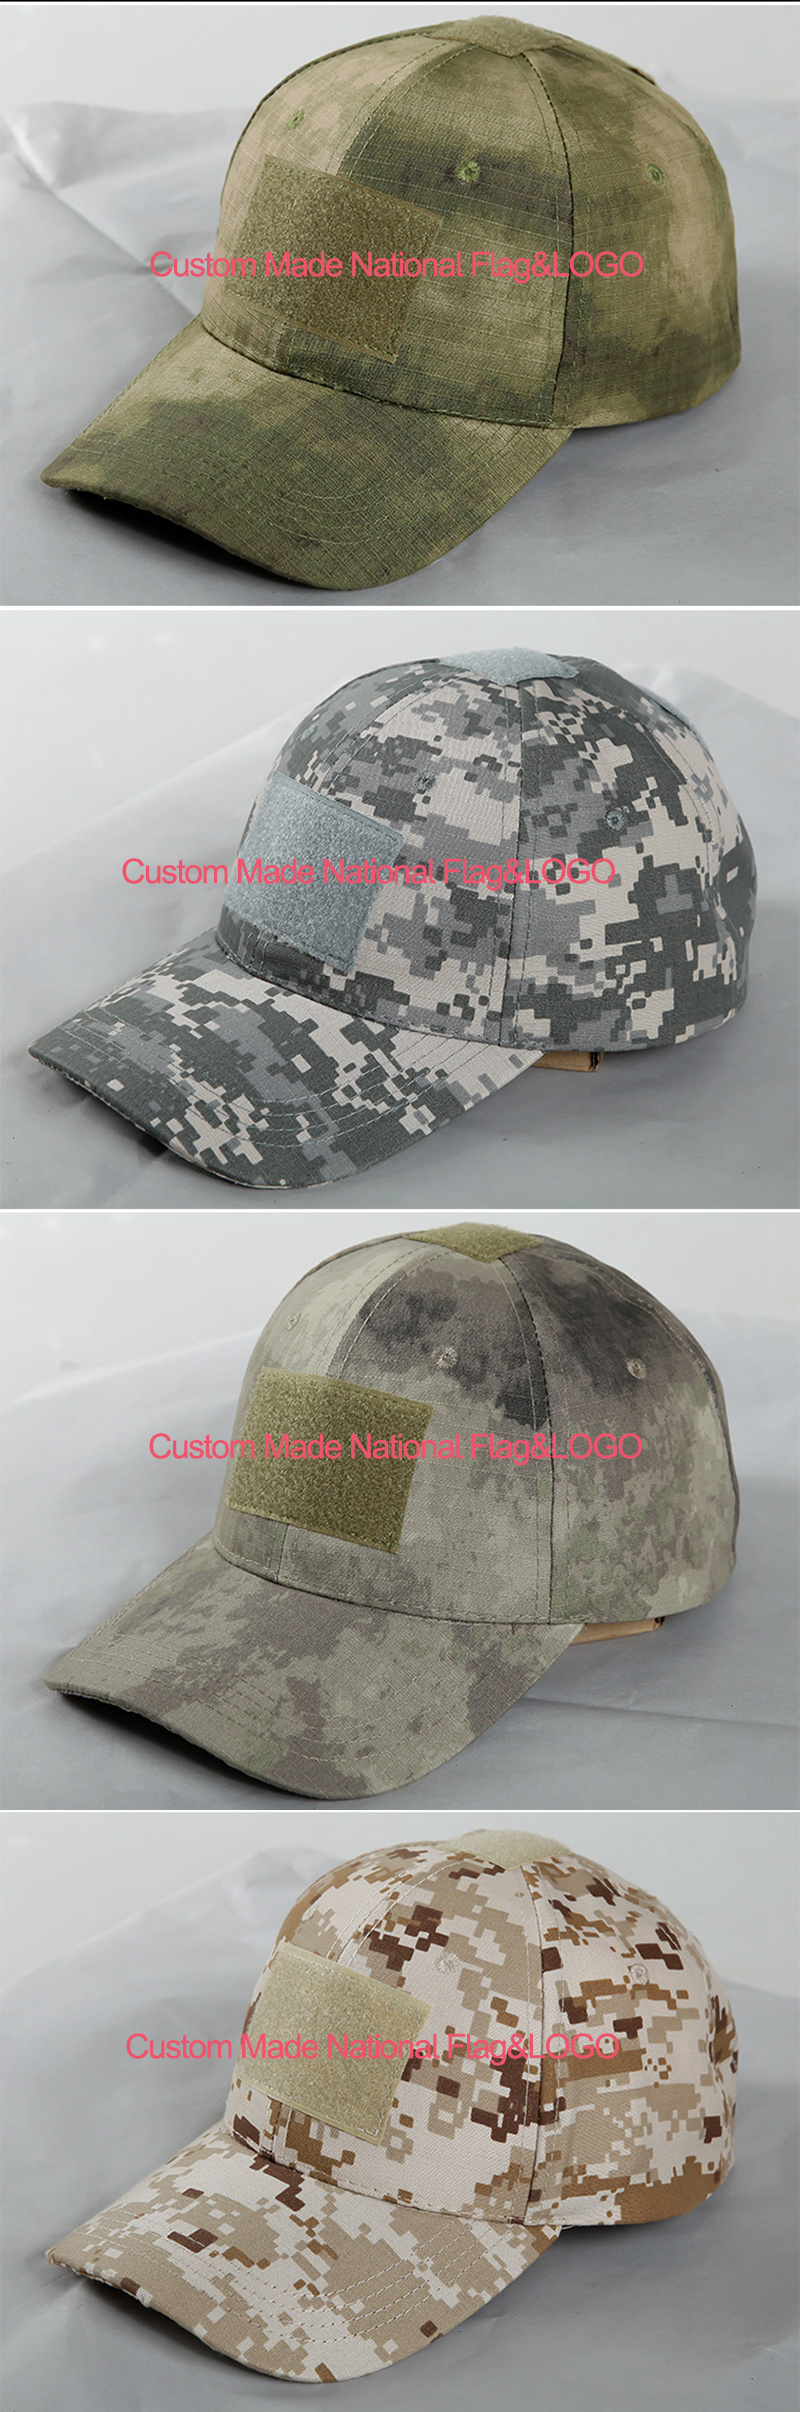 Condor Tactical Baseball Hat and Military Hunting Camo Patch Cap Camouflage Hat